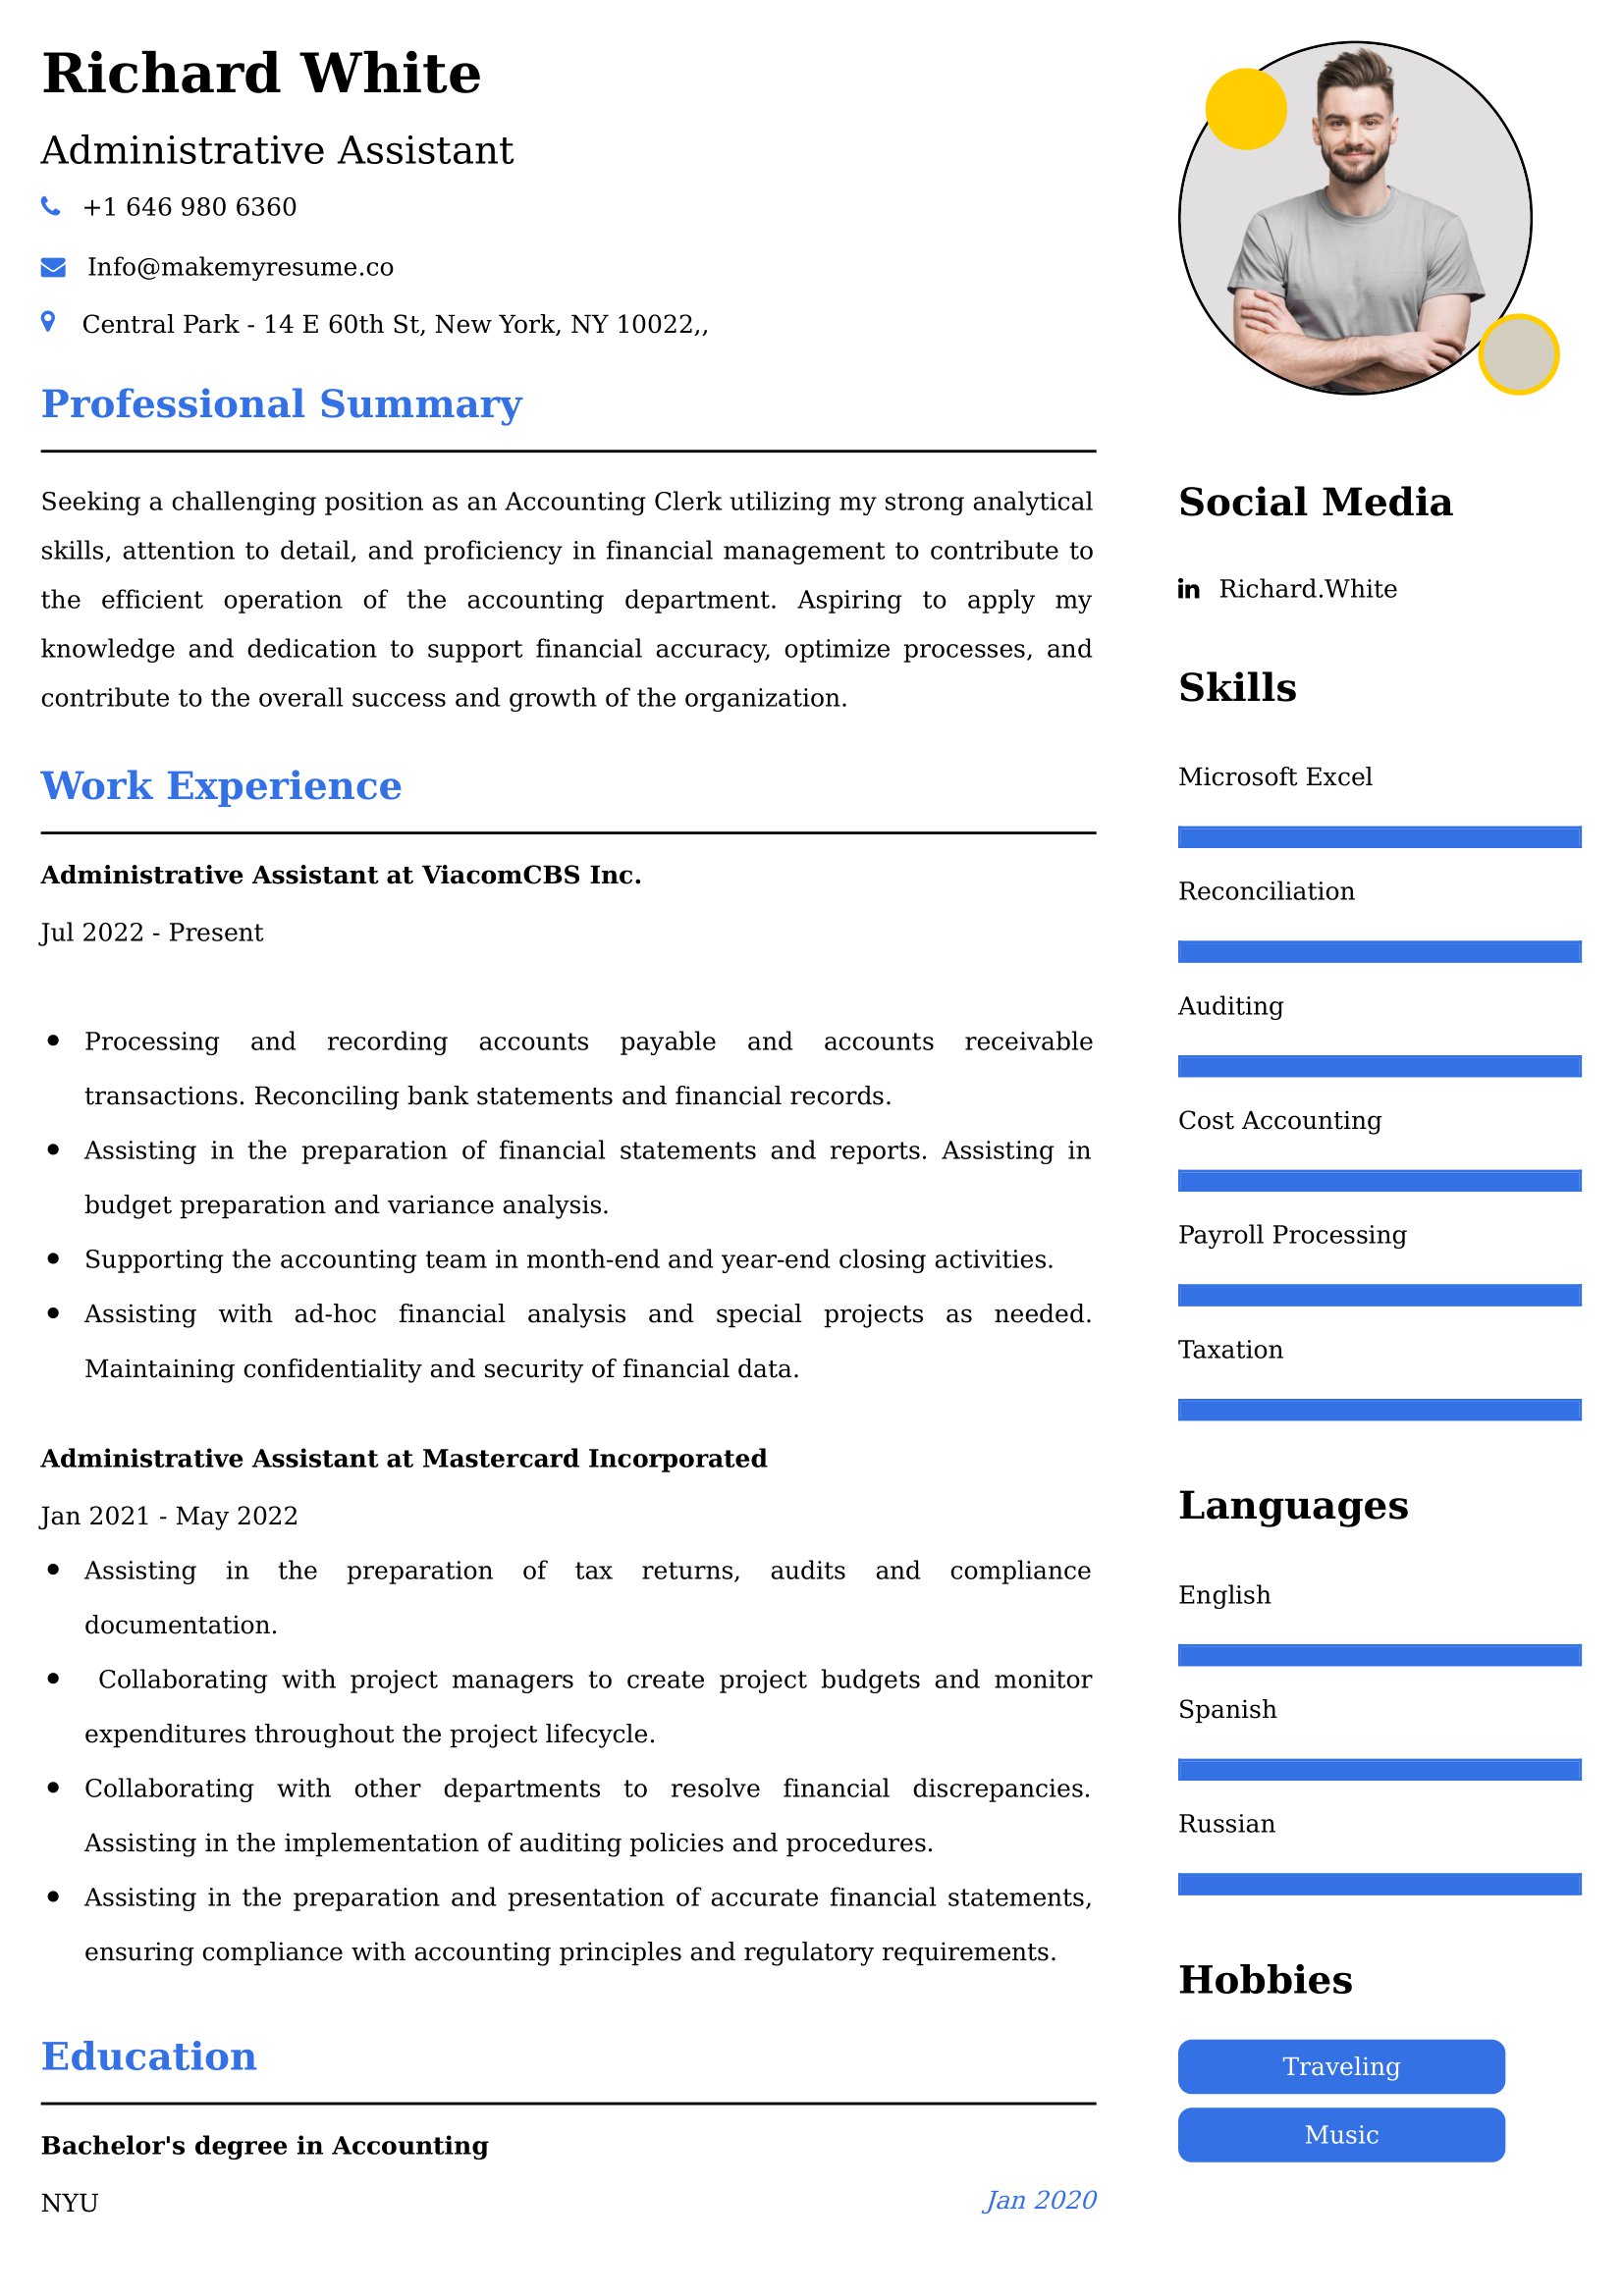 75+ Professional Administrative Resume Examples, Latest Format